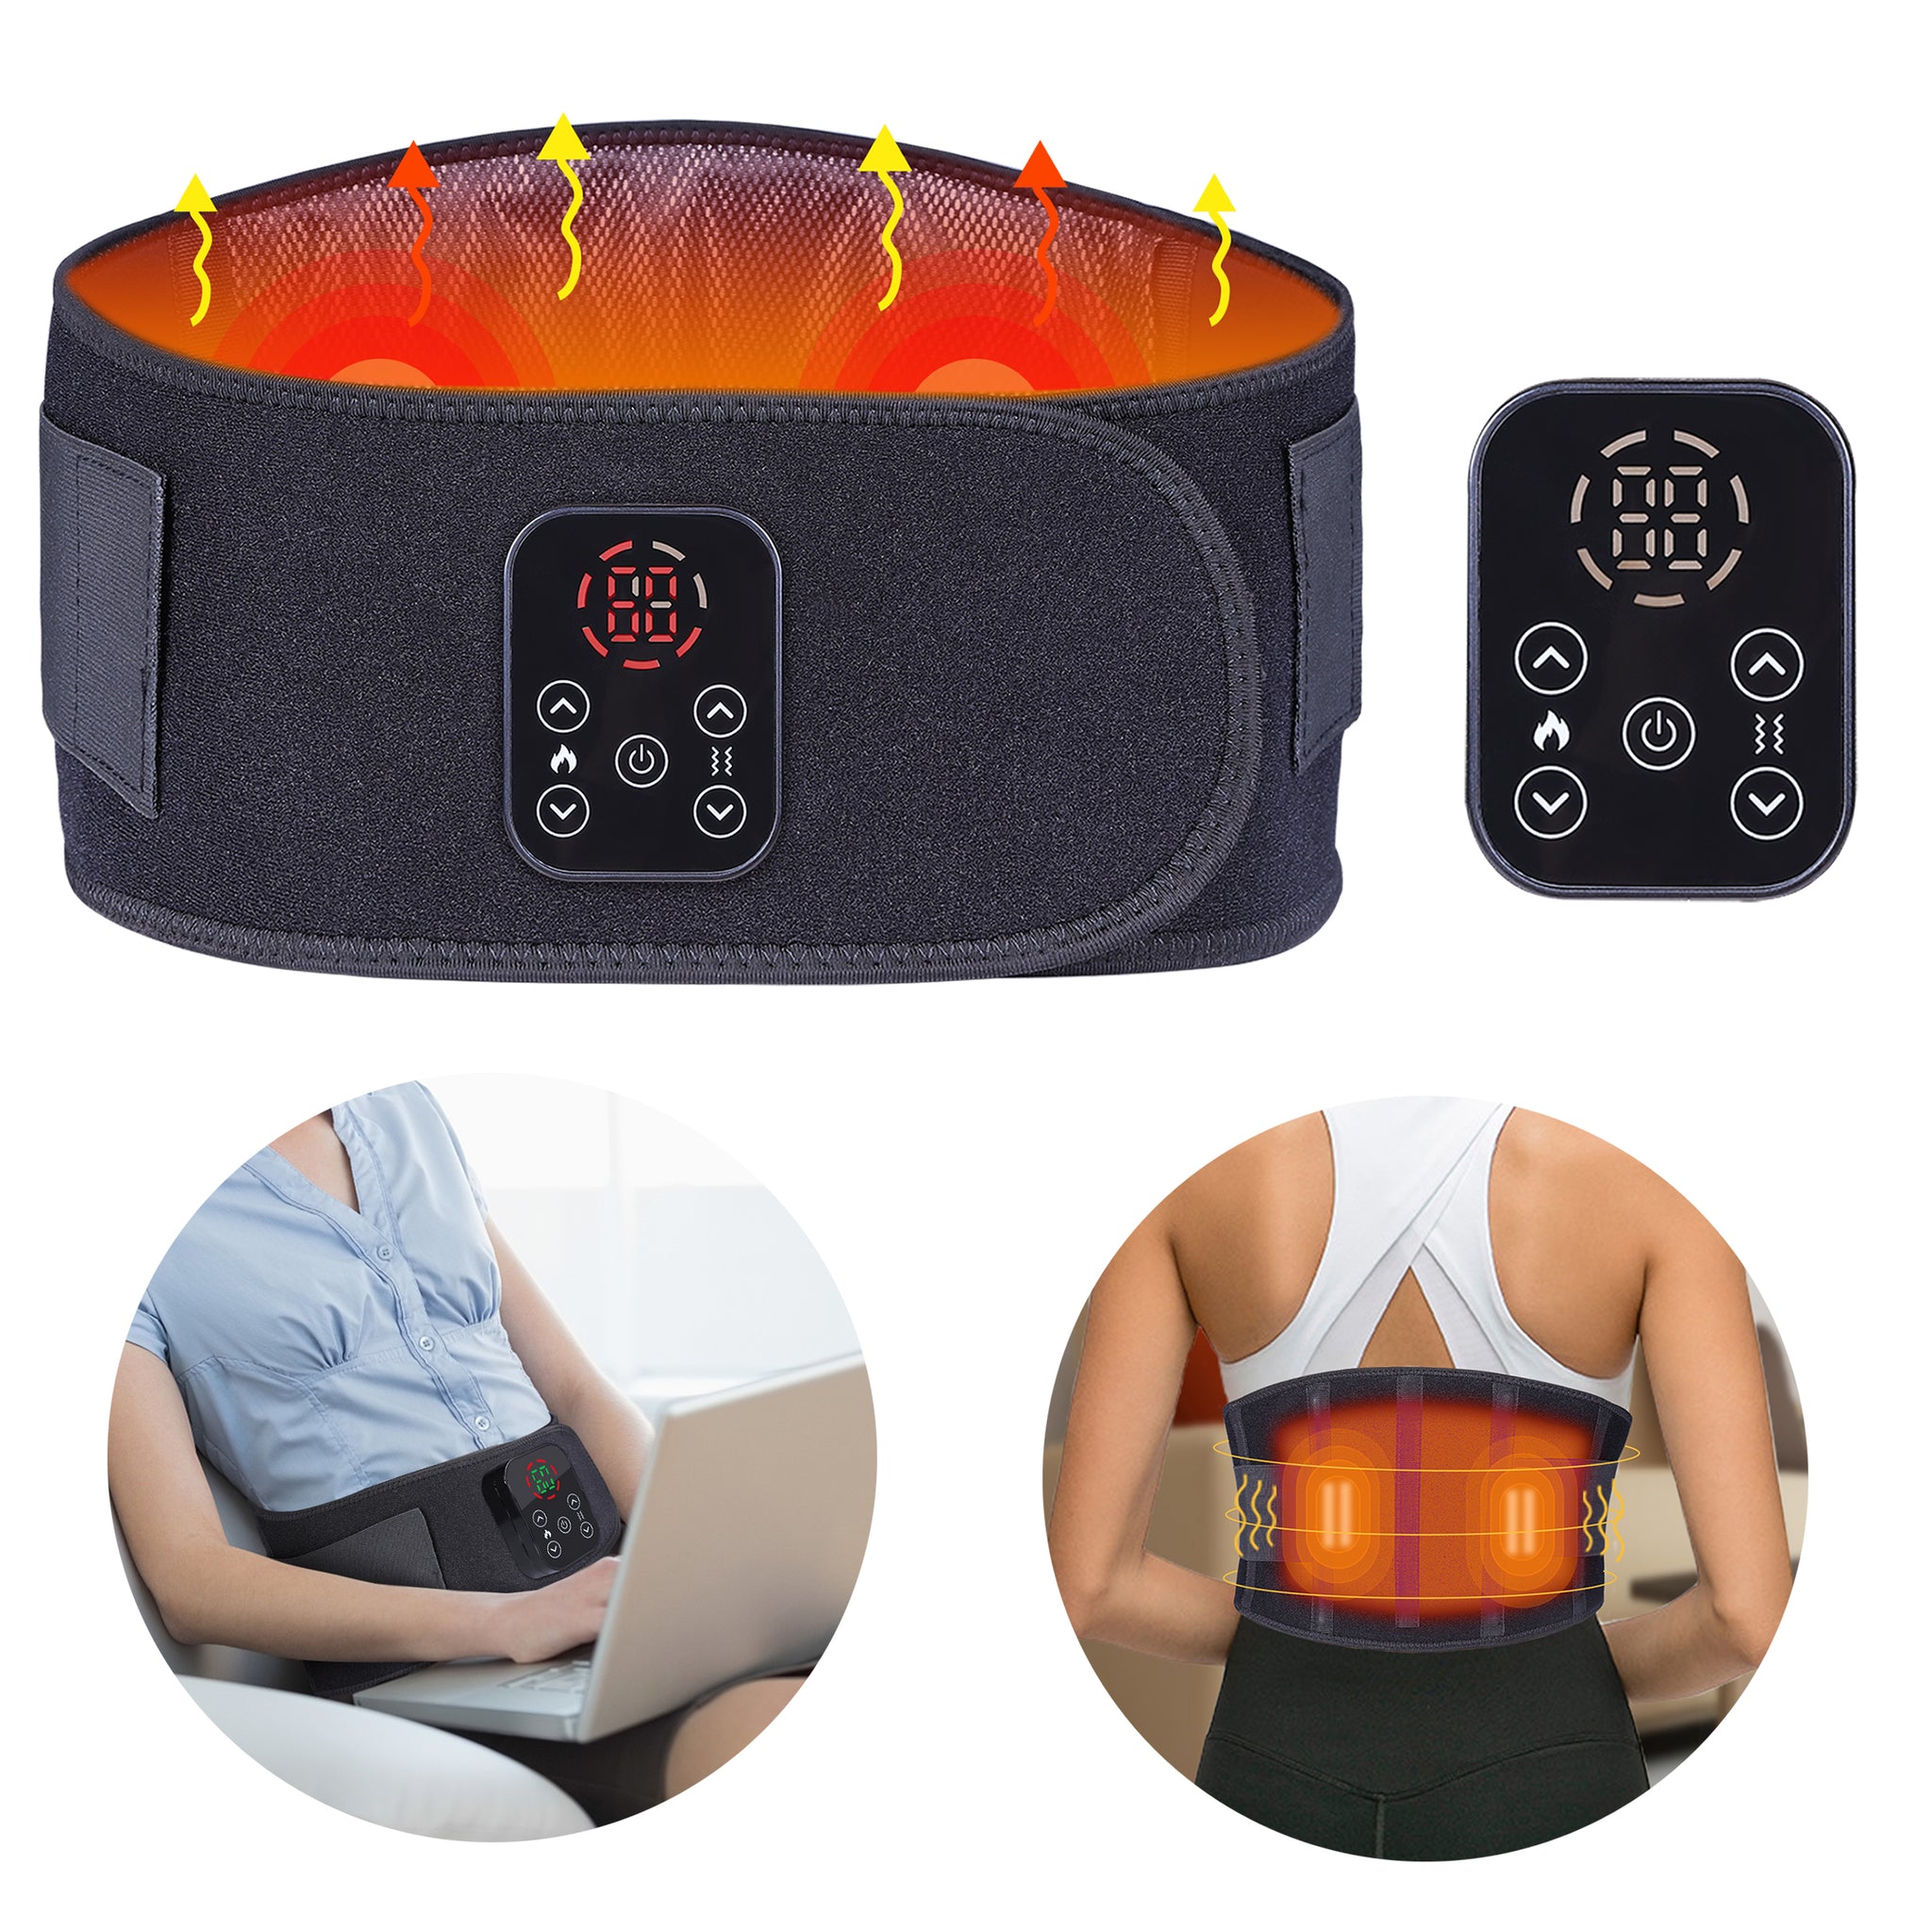 DGYAO Heating Pad Back Brace for Back Pain Relief with 7 Vibration